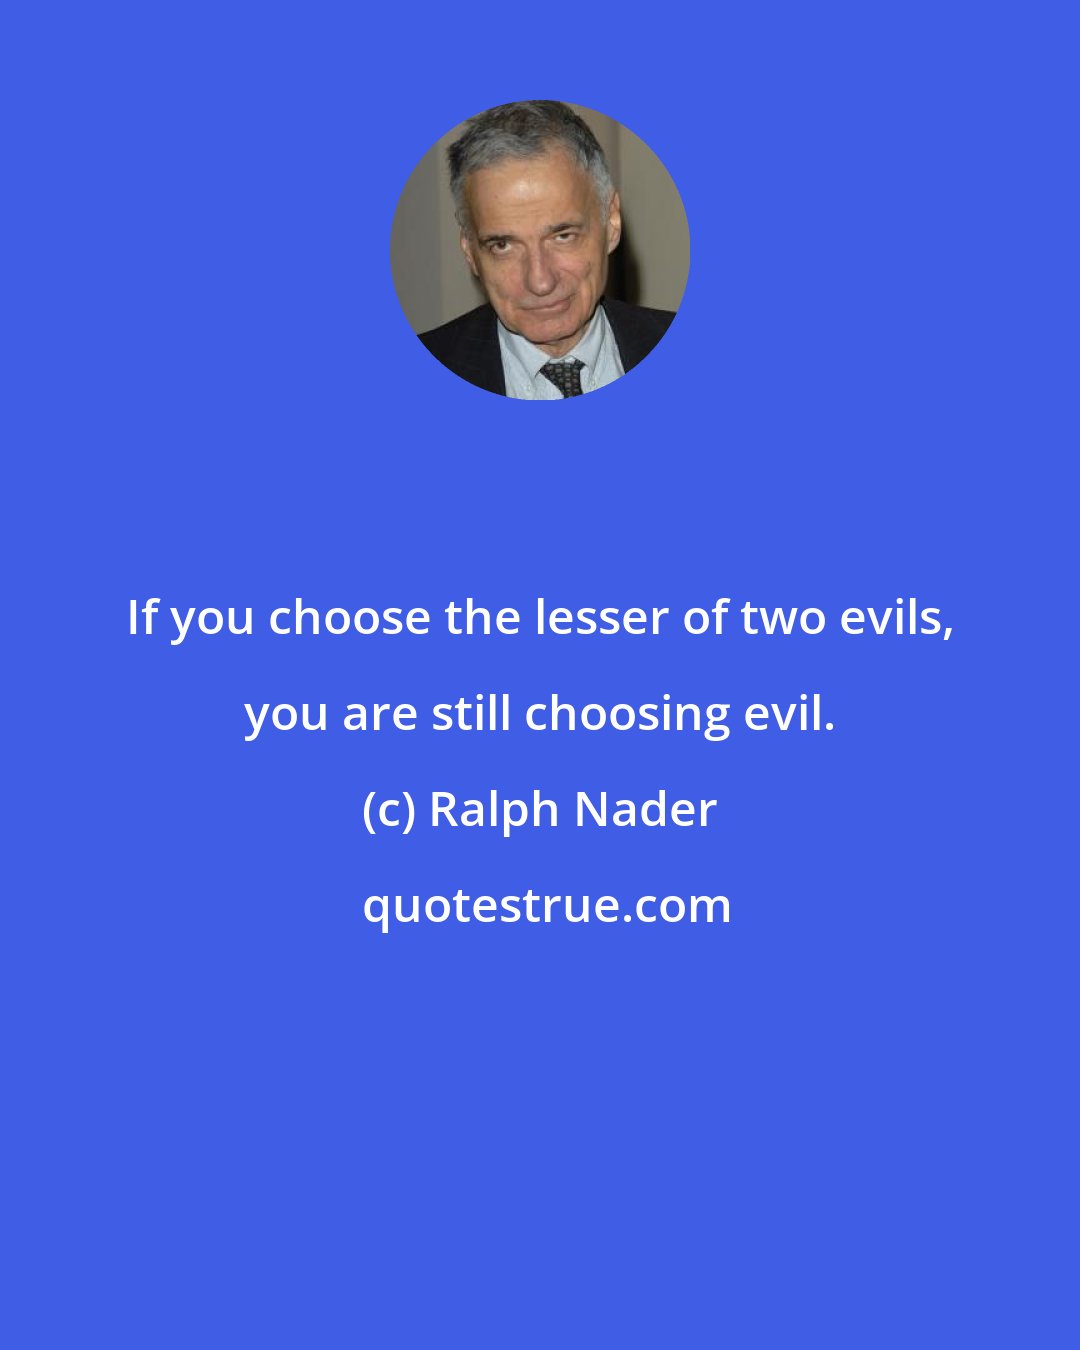 Ralph Nader: If you choose the lesser of two evils, you are still choosing evil.